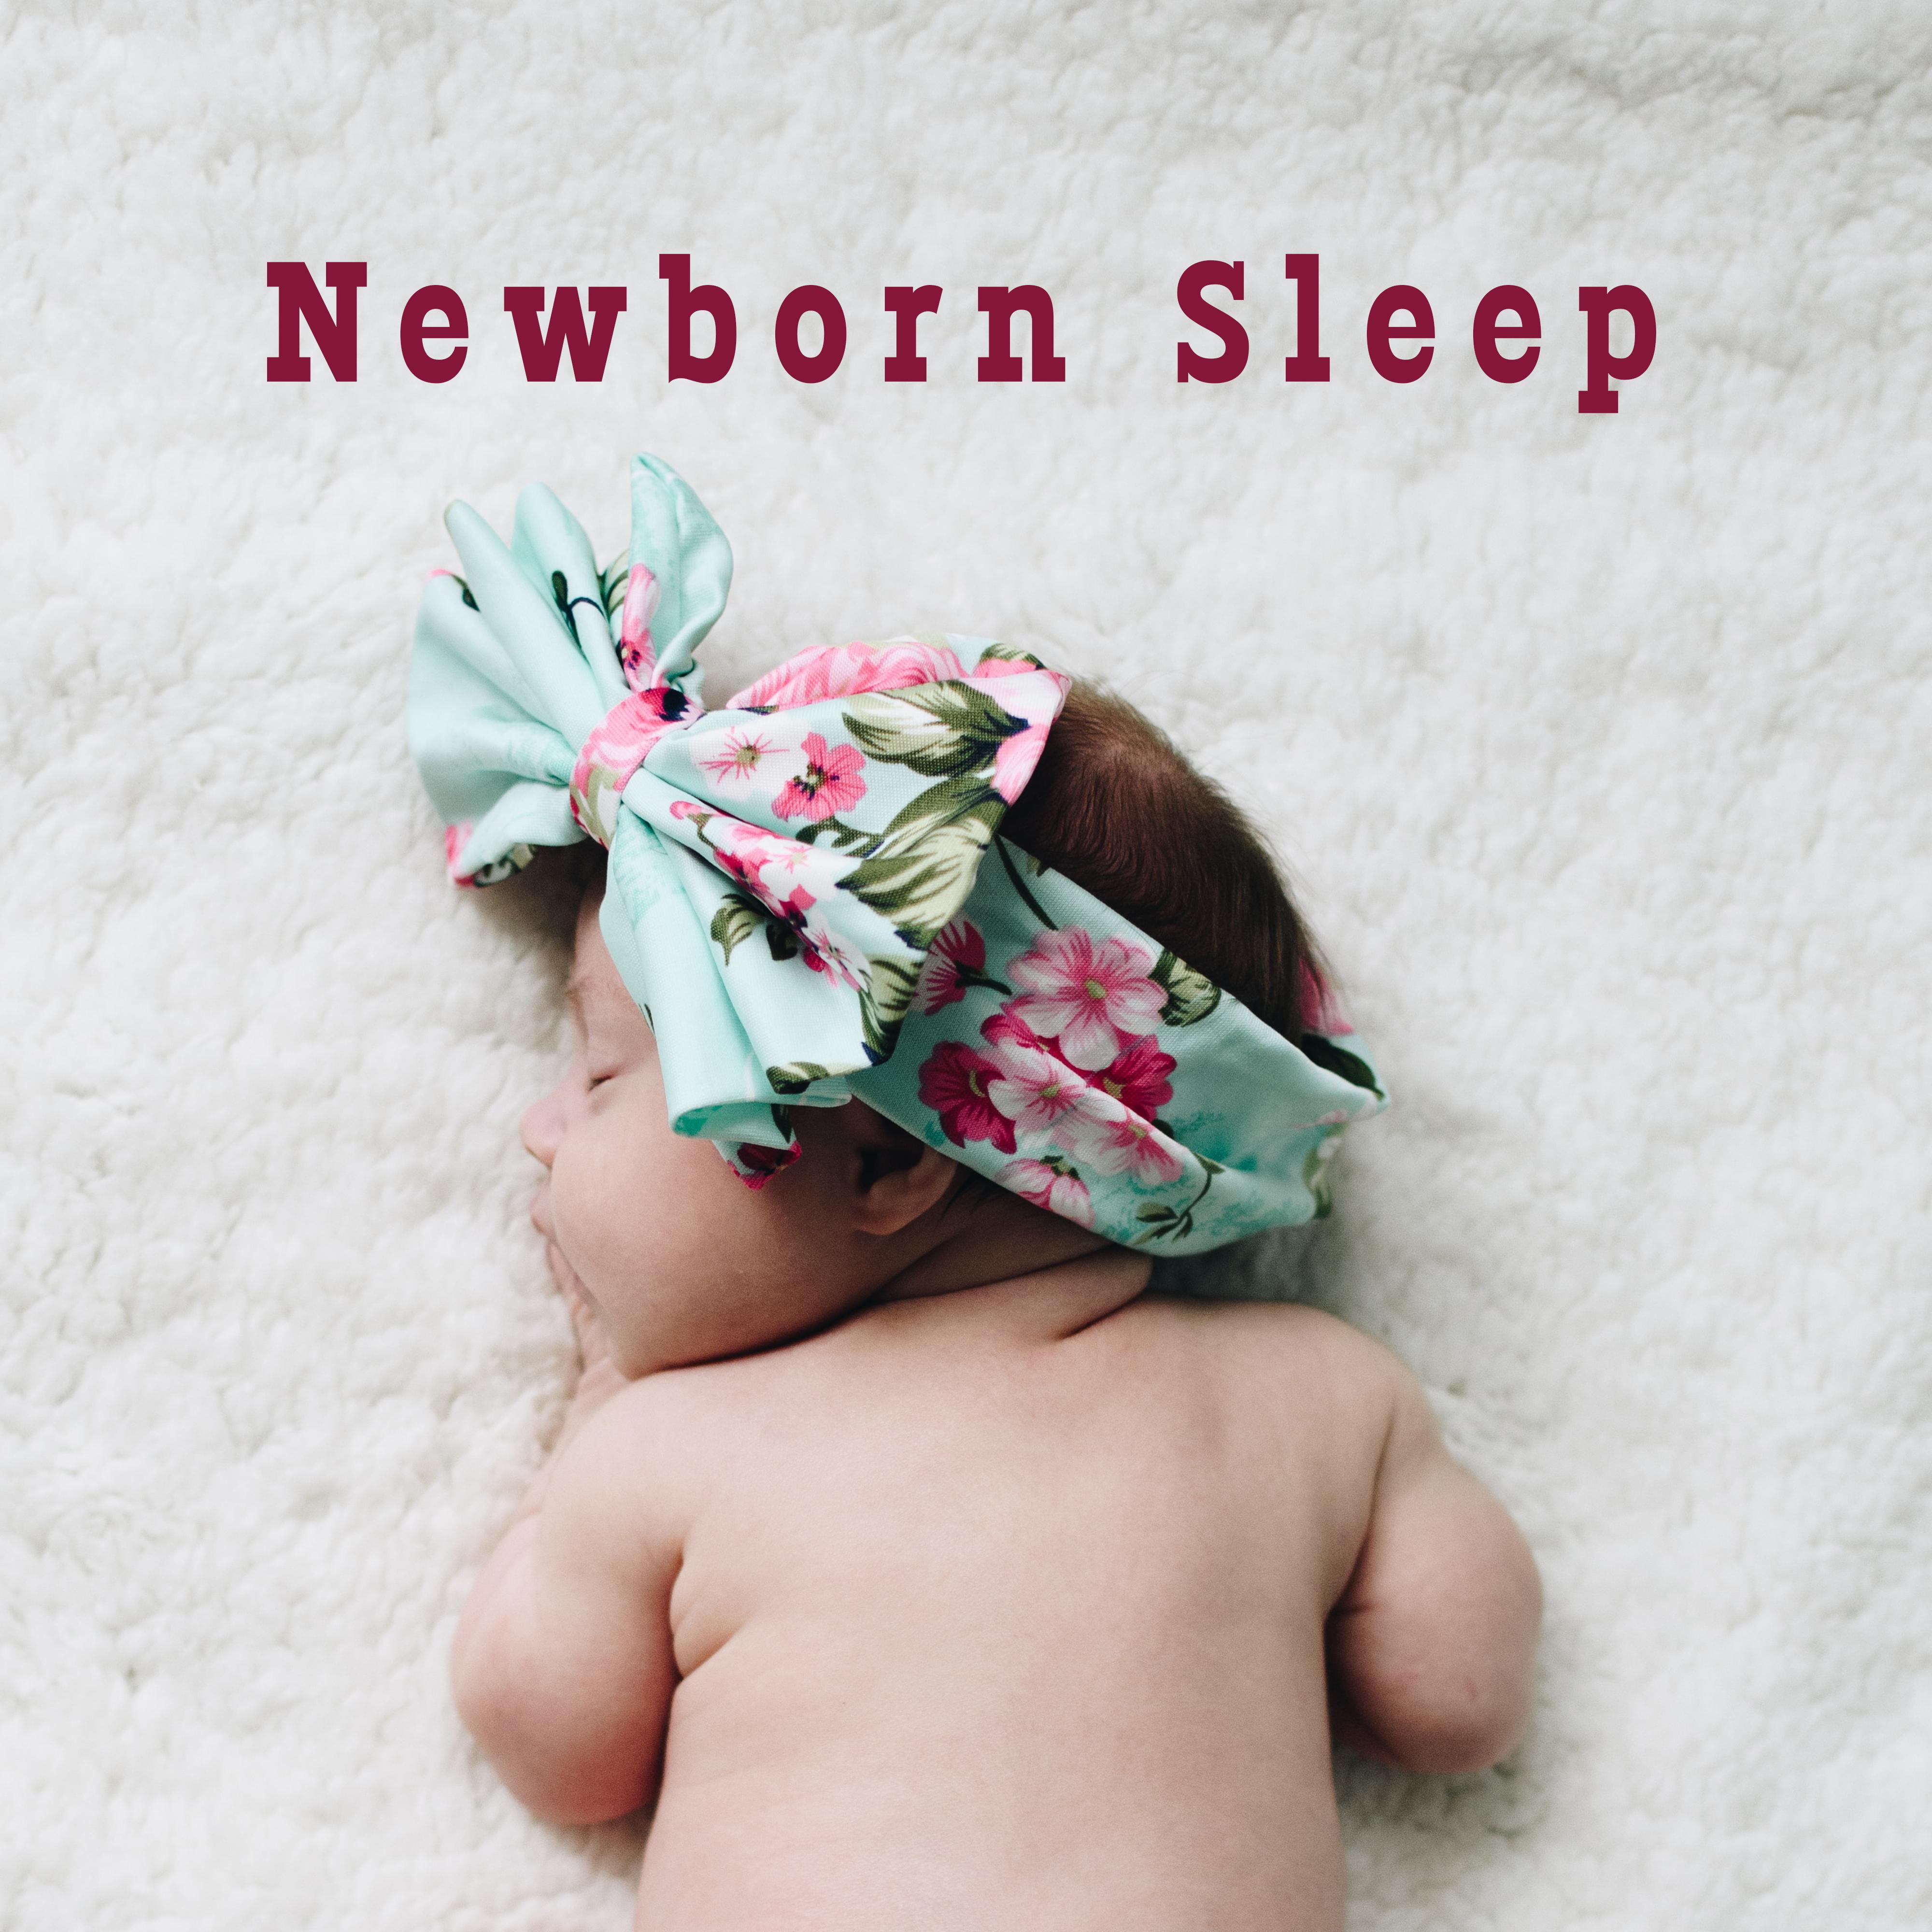 Newborn Sleep: Sweet Music for Baby, Bedtime Baby, Calming Sounds at Night, Relaxing Lullabies for Babies, Cradle Songs 2019, Lounge